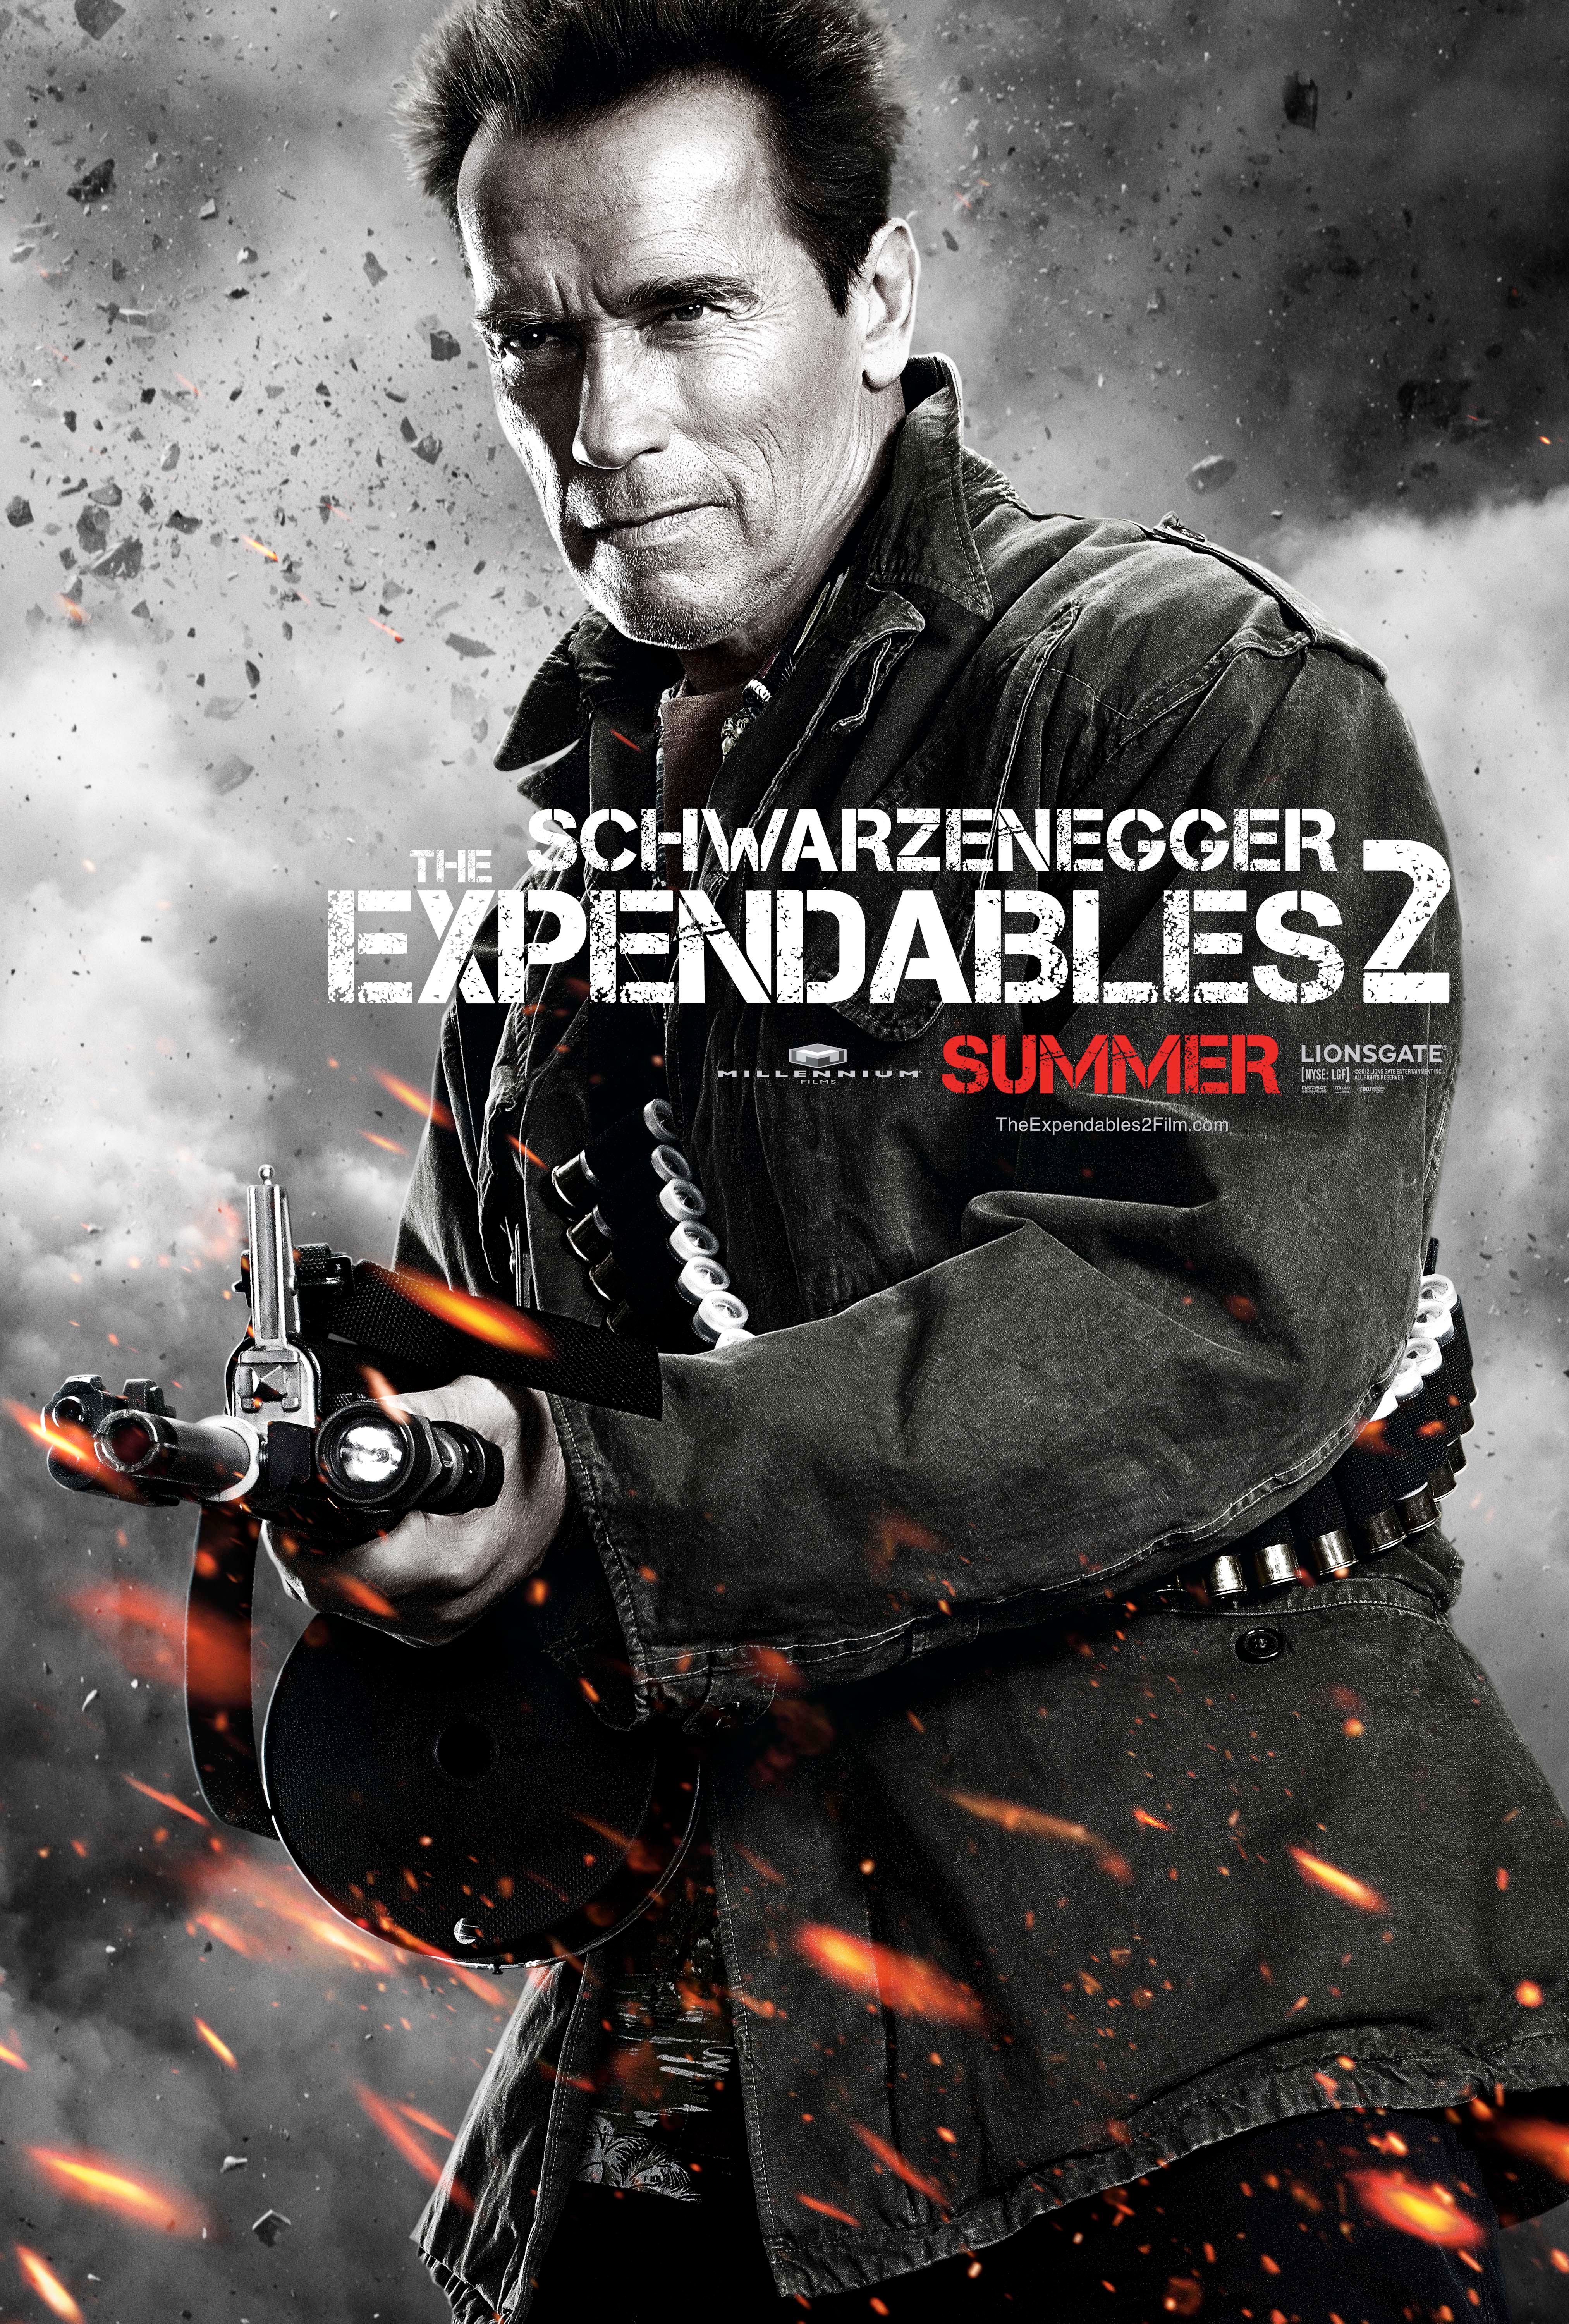 The Expendables 2 Character Poser #3